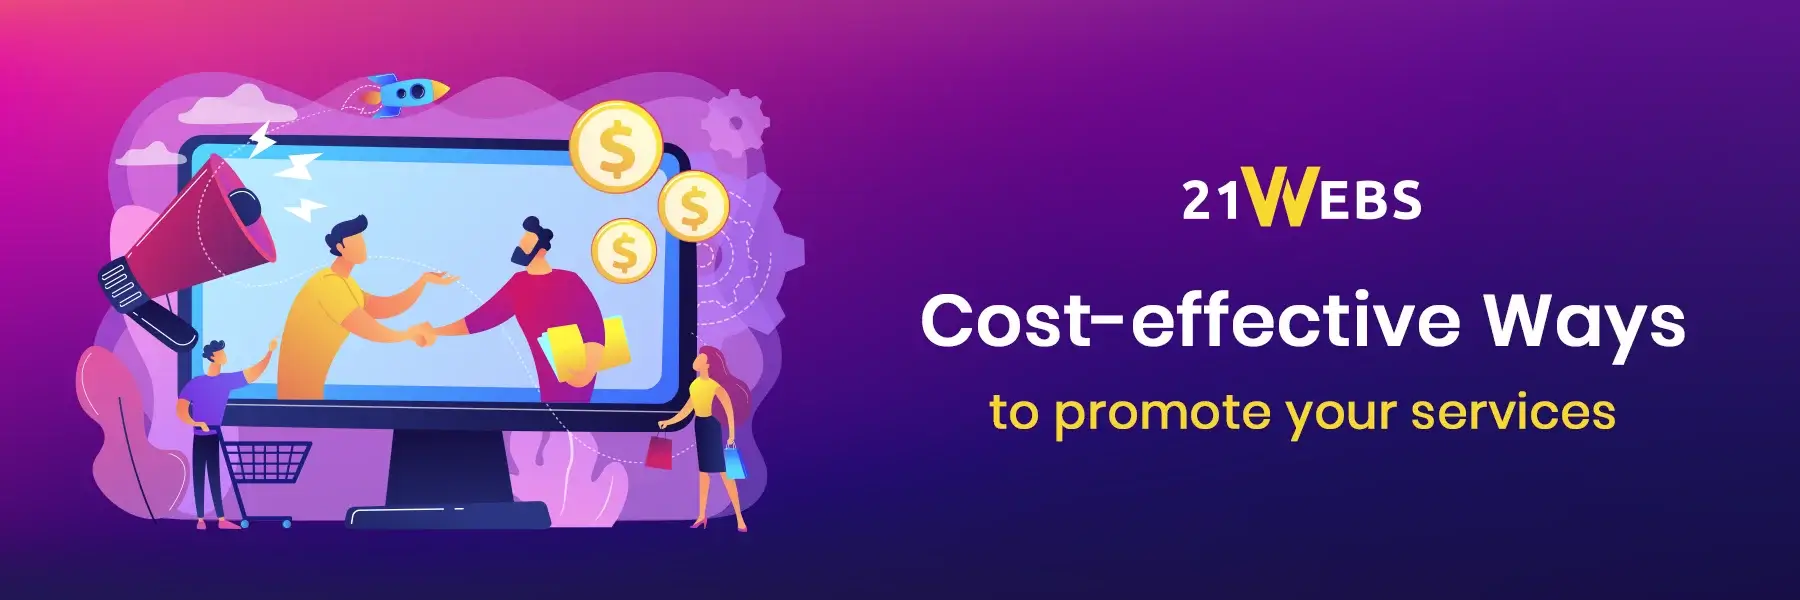 Cost-effective Ways to promote your services